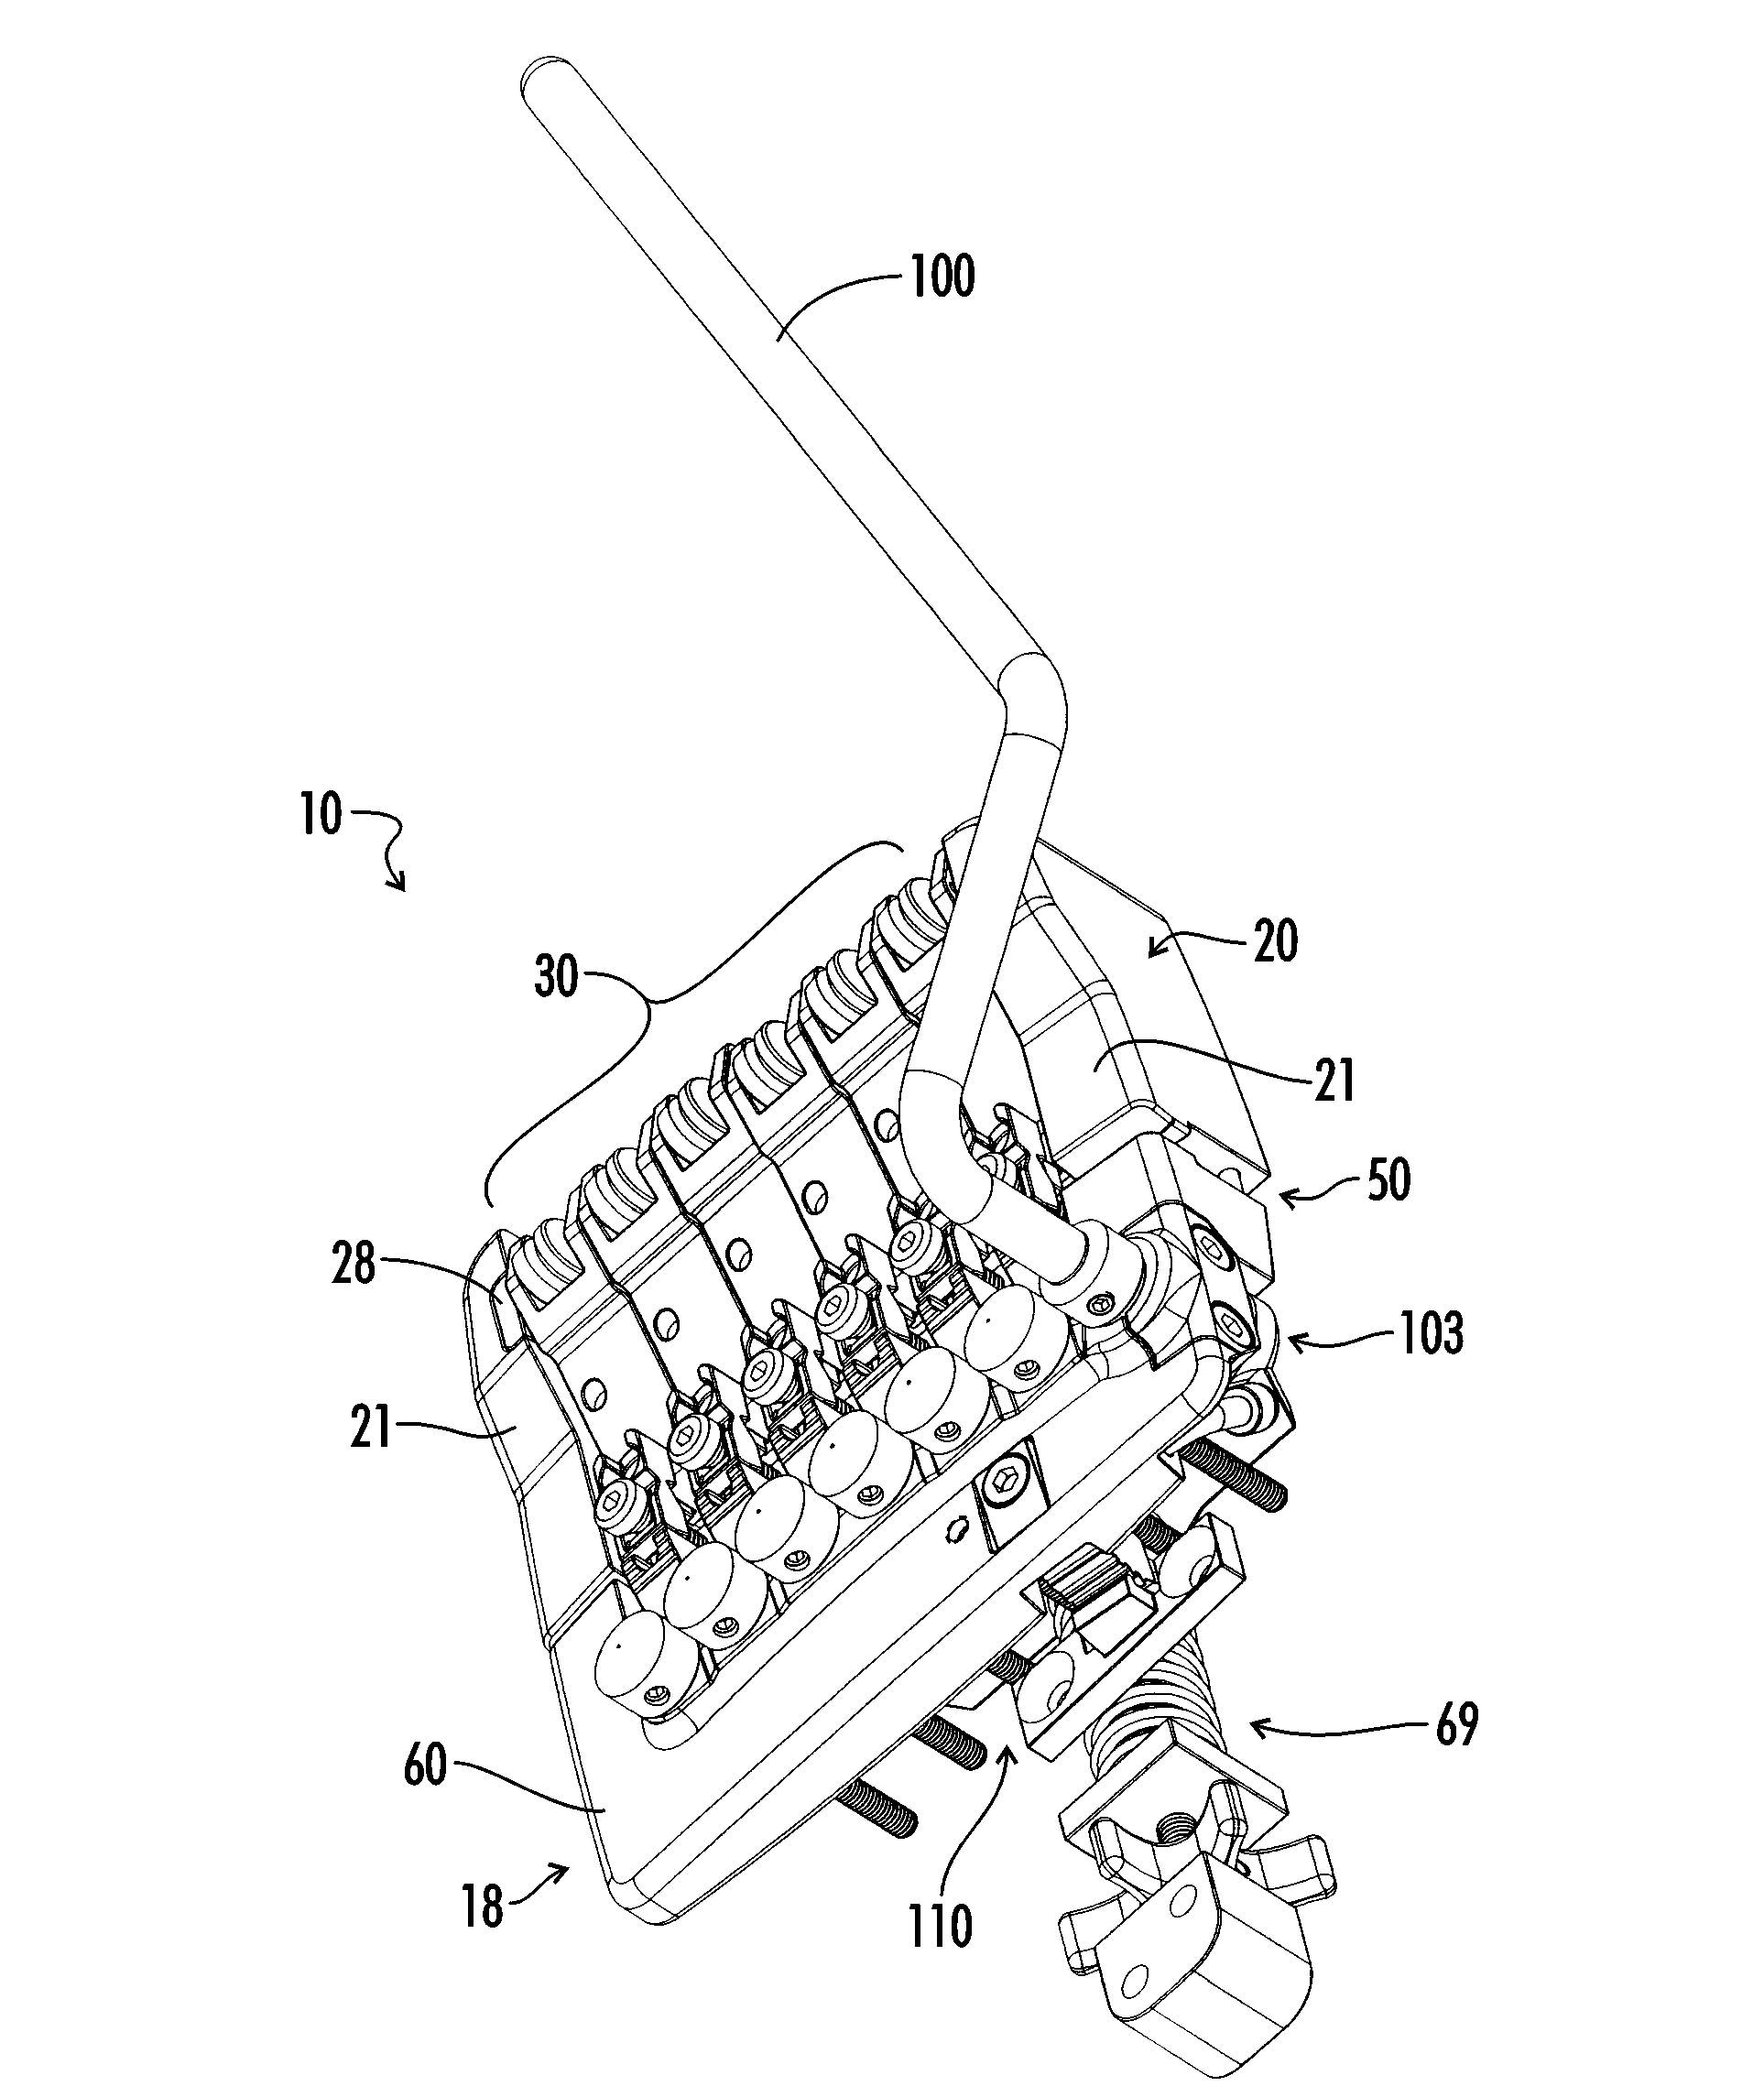 Tremolo Mechanism For A Stringed Musical Instrument With Cam Actuated Lock